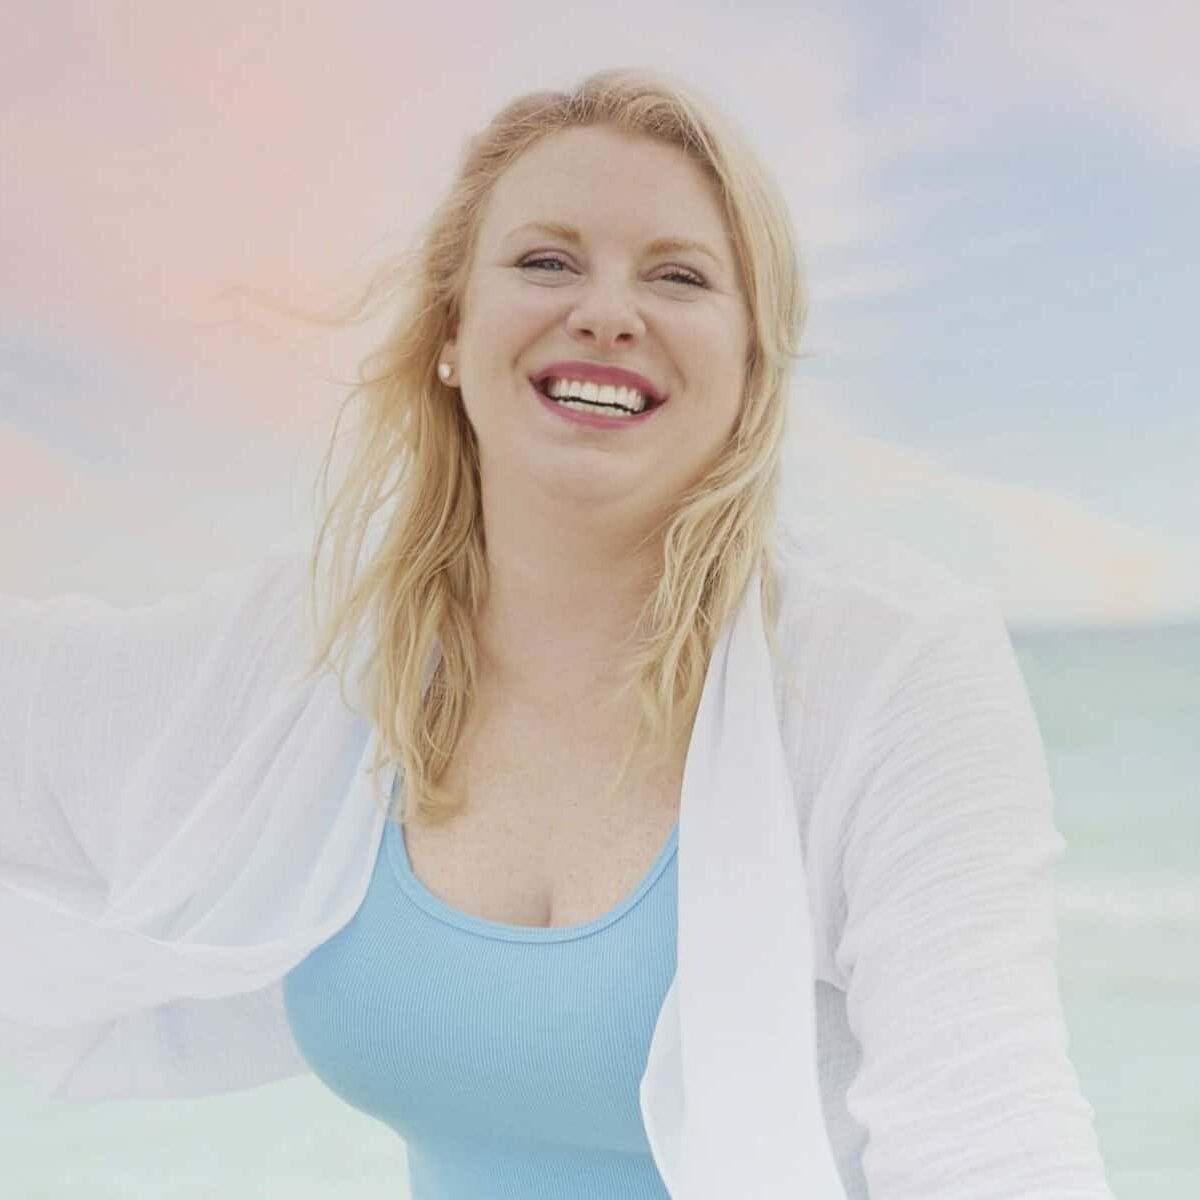 A smiling woman in a blue swimsuit on the beach.